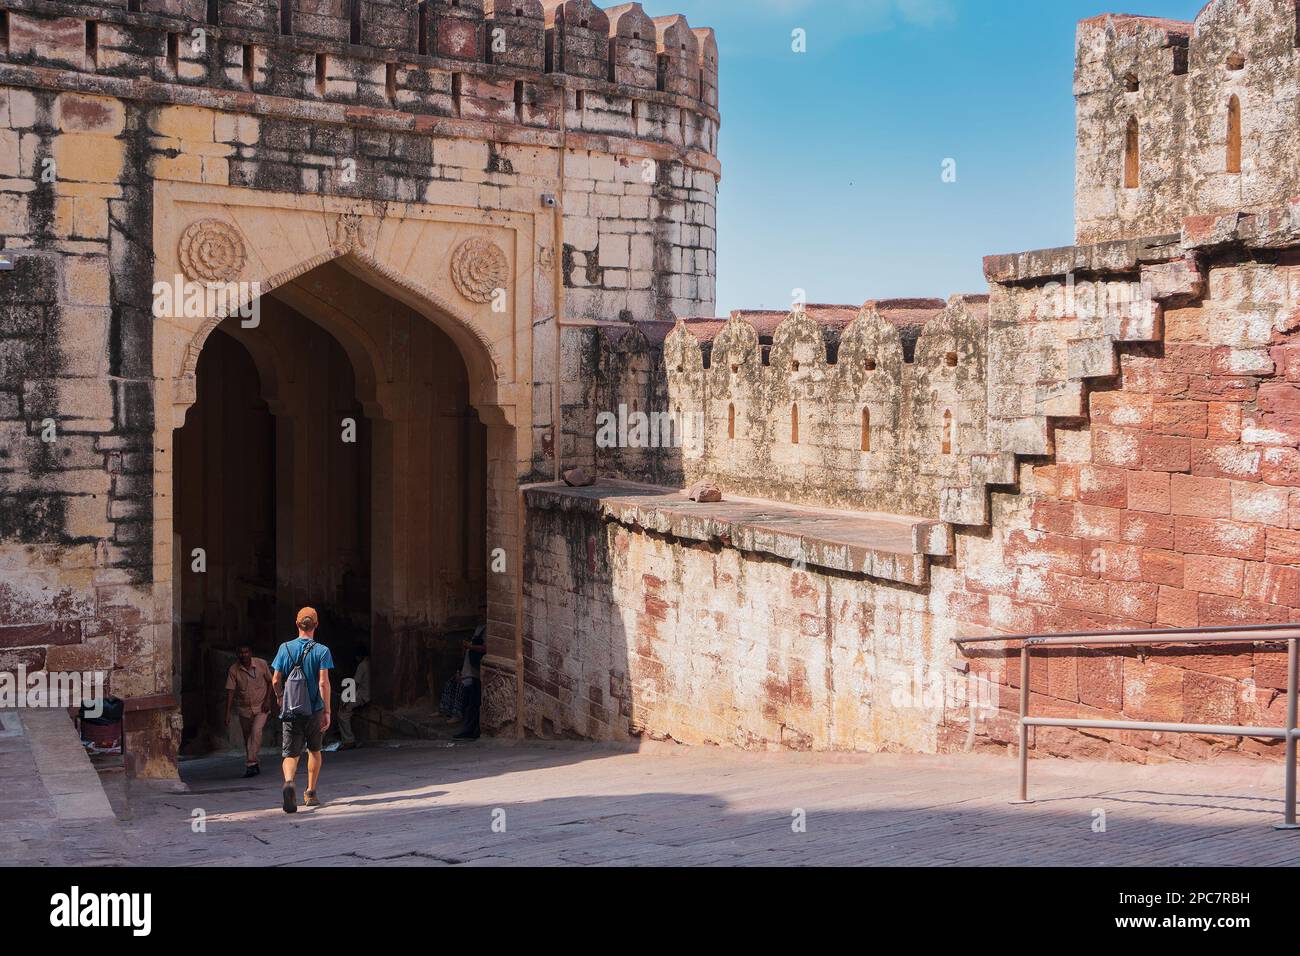 Jodhpur, Rajasthan, India - 19th October 2019 : Male foreigner tourist visiting famous Mehrangarh fort. Mehrangarh Fort is UNESCO world heritage site. Stock Photo